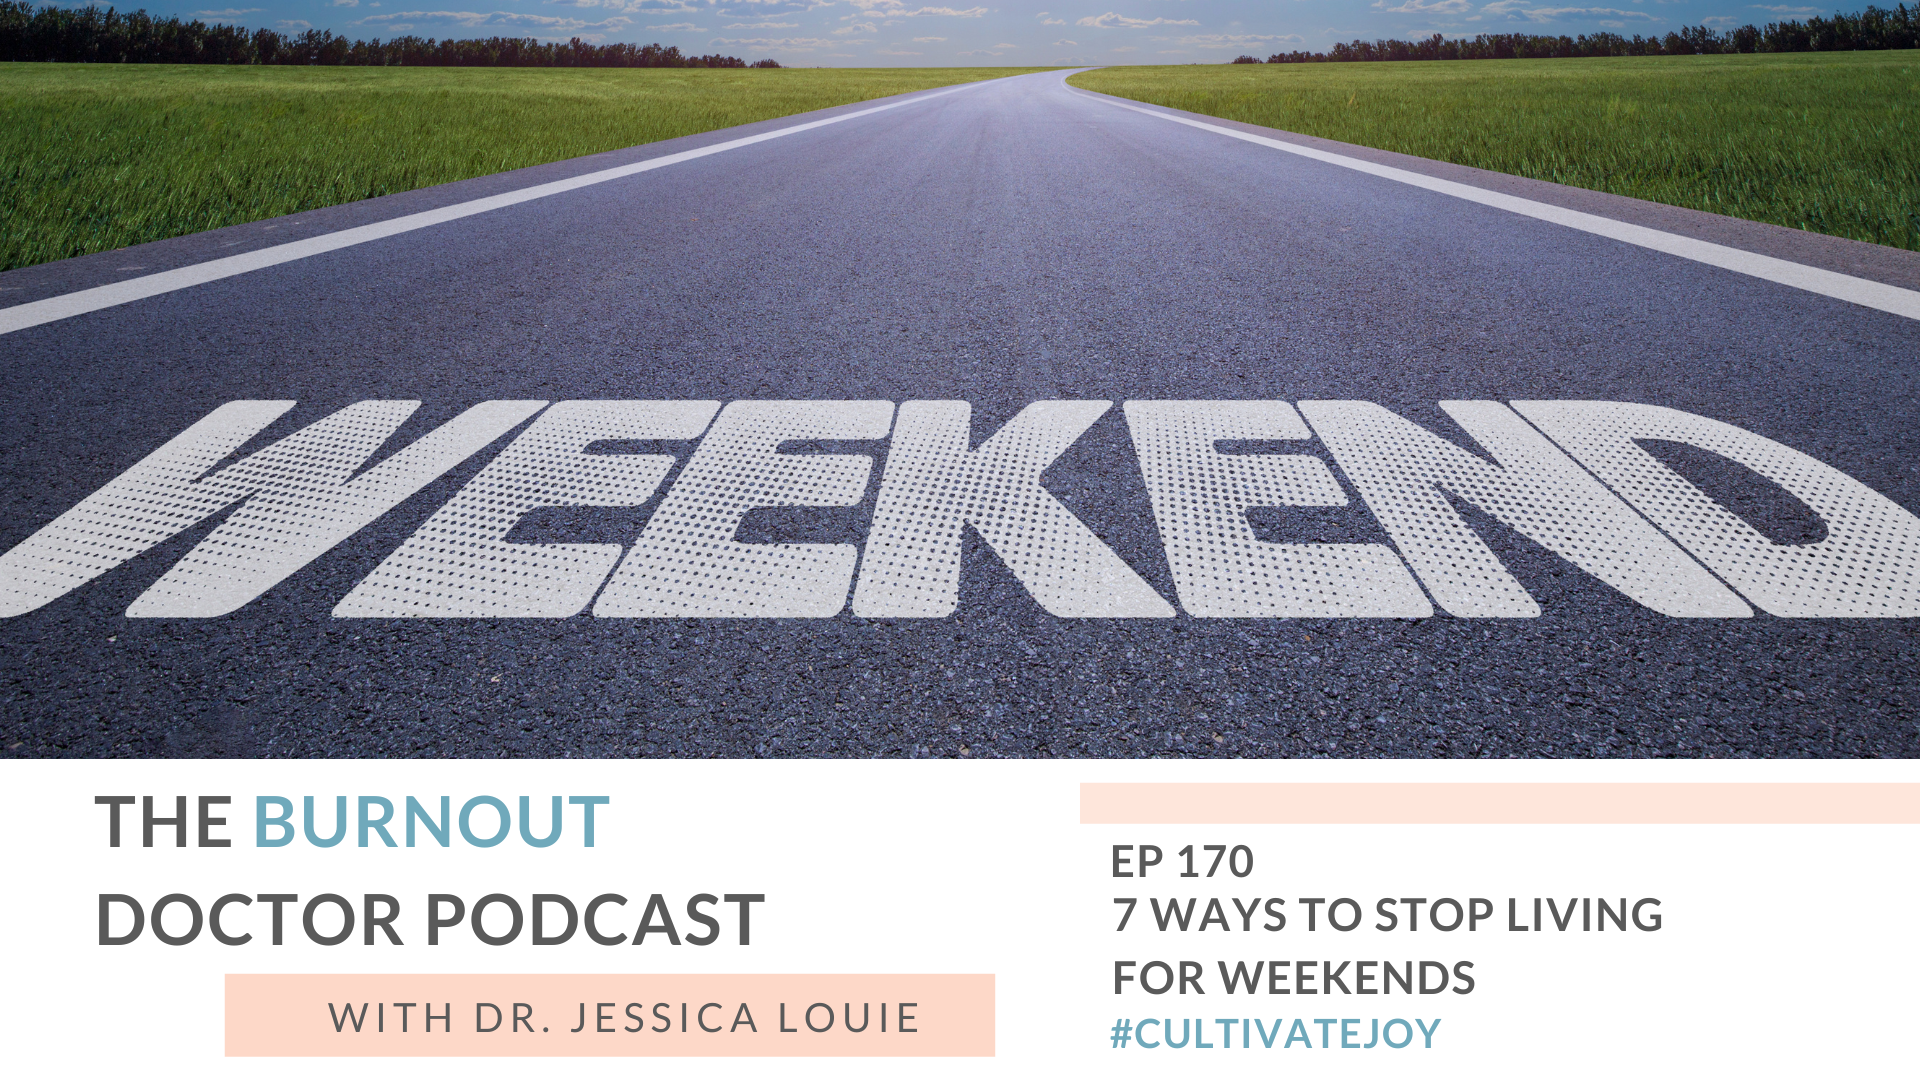 7 ways to stop living for weekends. how to help healthcare burnout. Pharmacist burnout. The Burnout Doctor Podcast. Dr. Jessica Louie